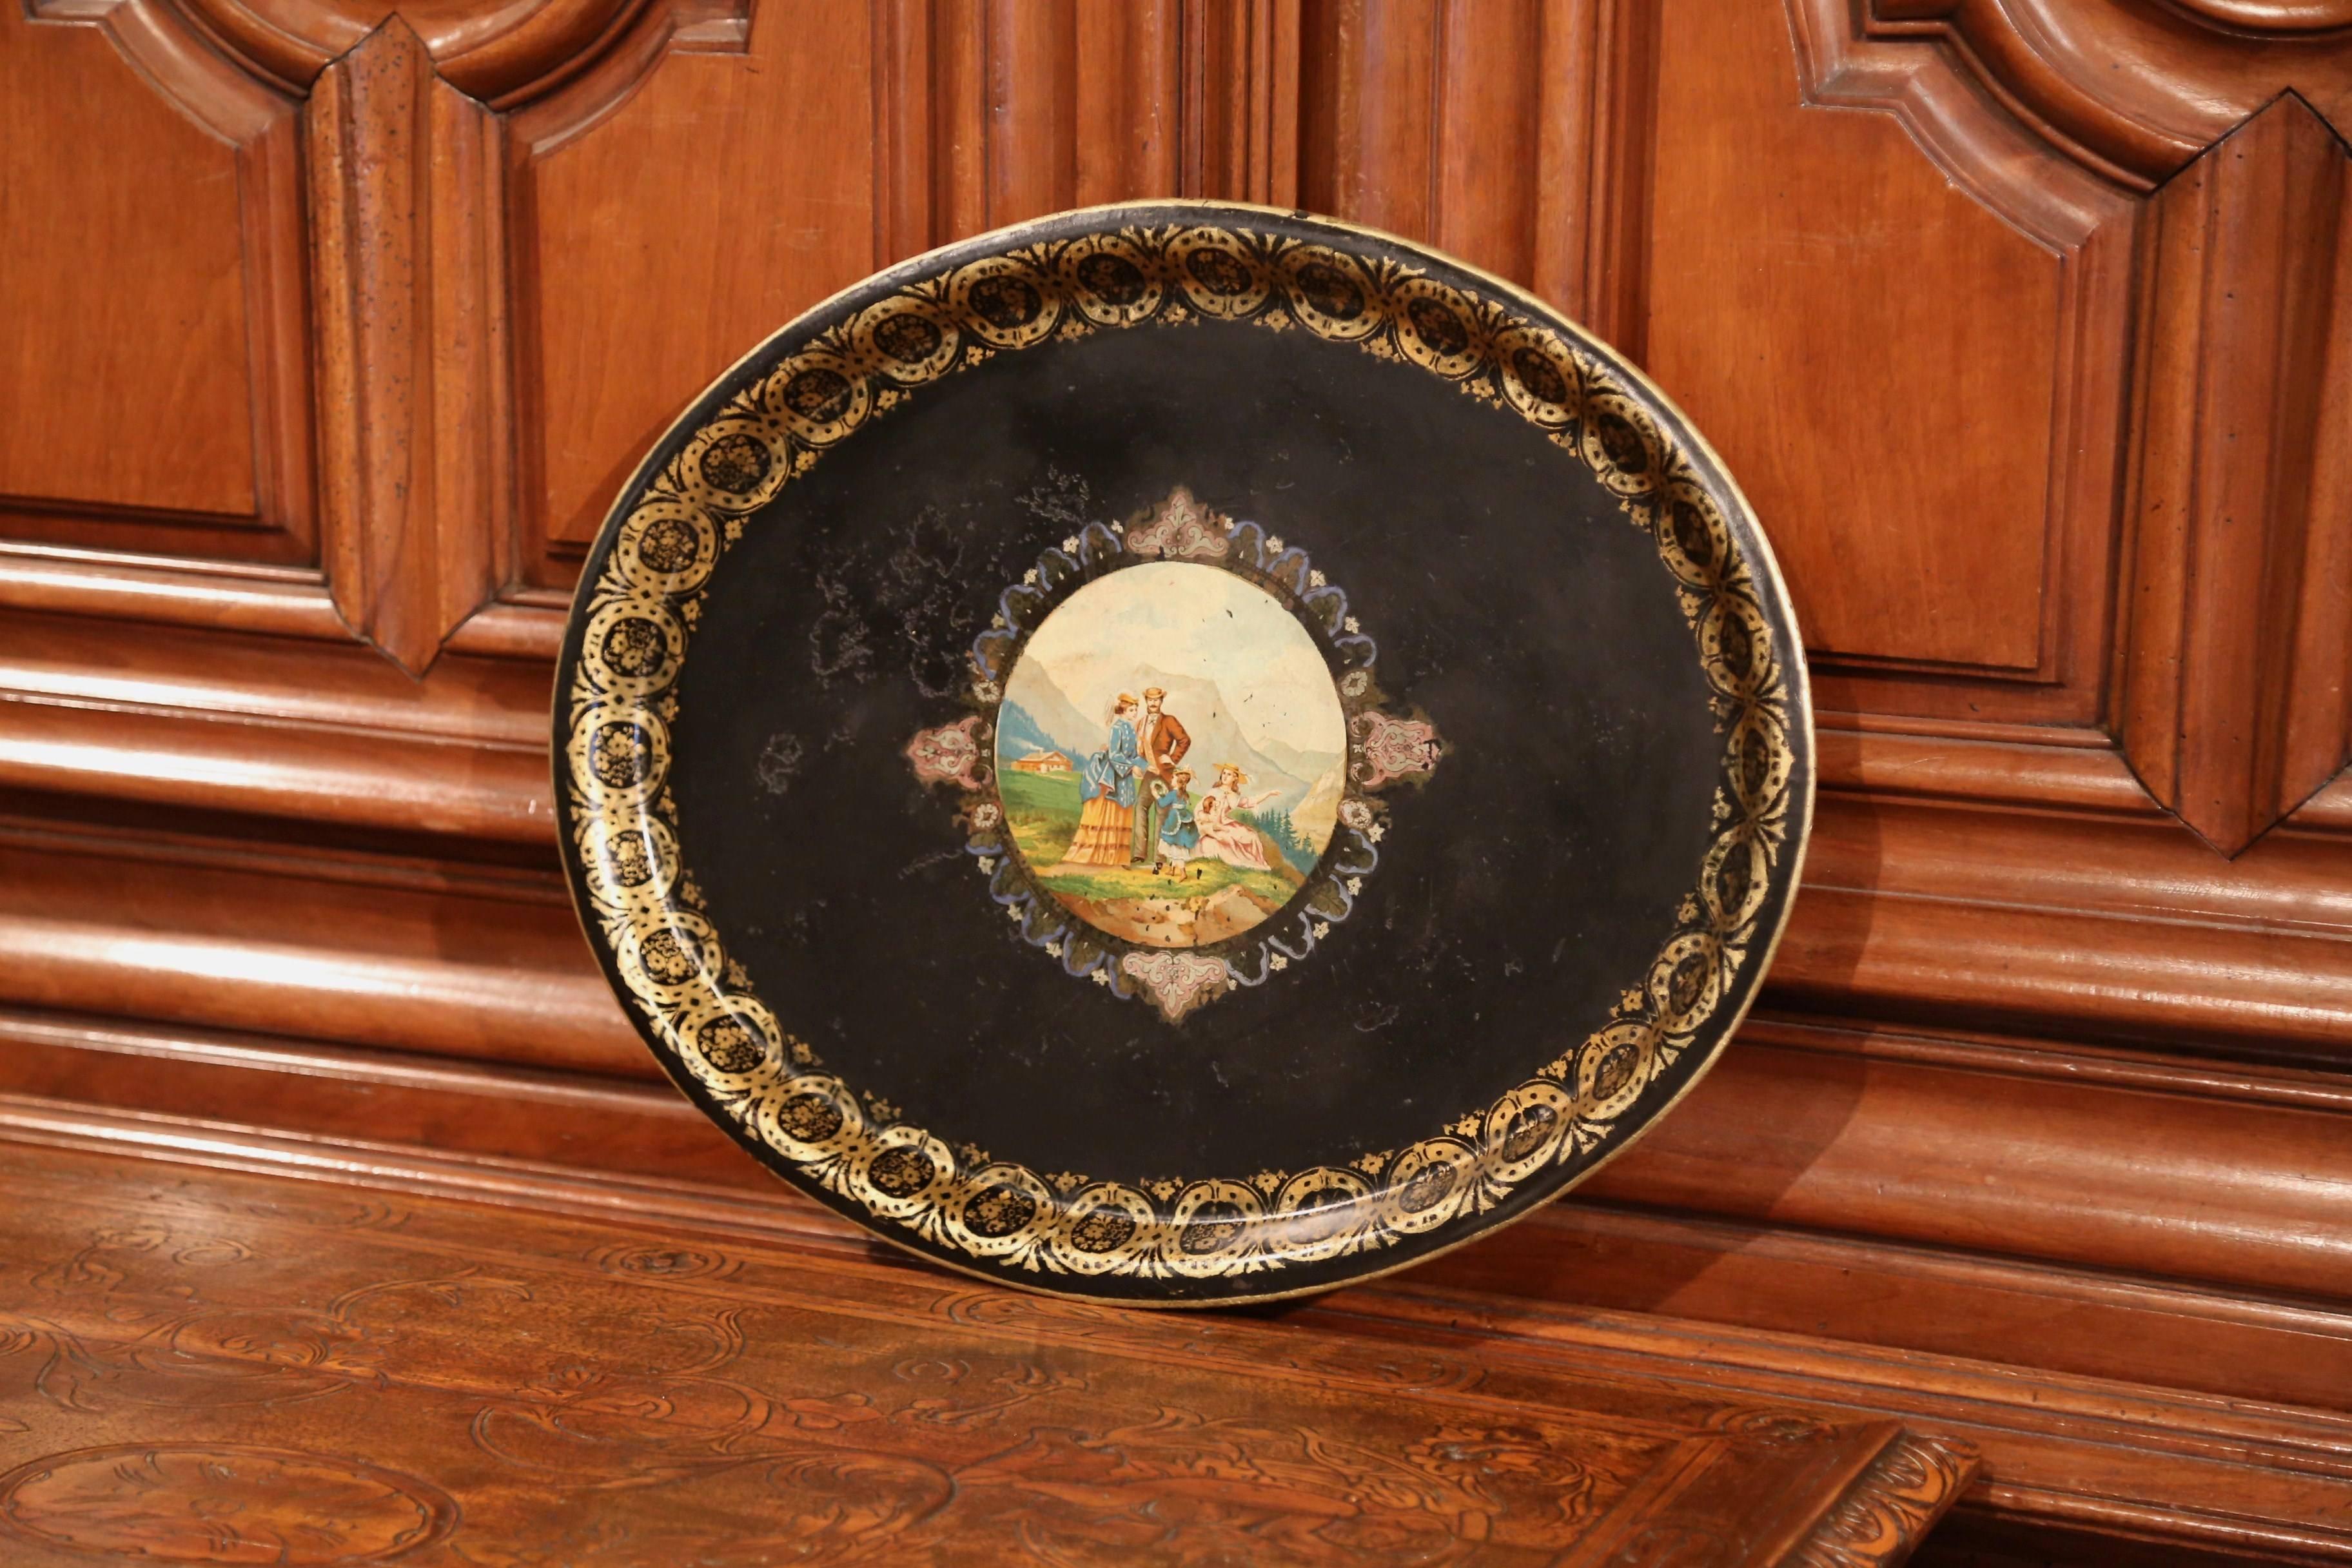 This elegant antique tray was crafted in France, circa 1870; oval in shape, the black tole platter is embellished by hand painted gilt decor around the lip, and features a colorful landscape scene in the center. The scene depicts a family with a